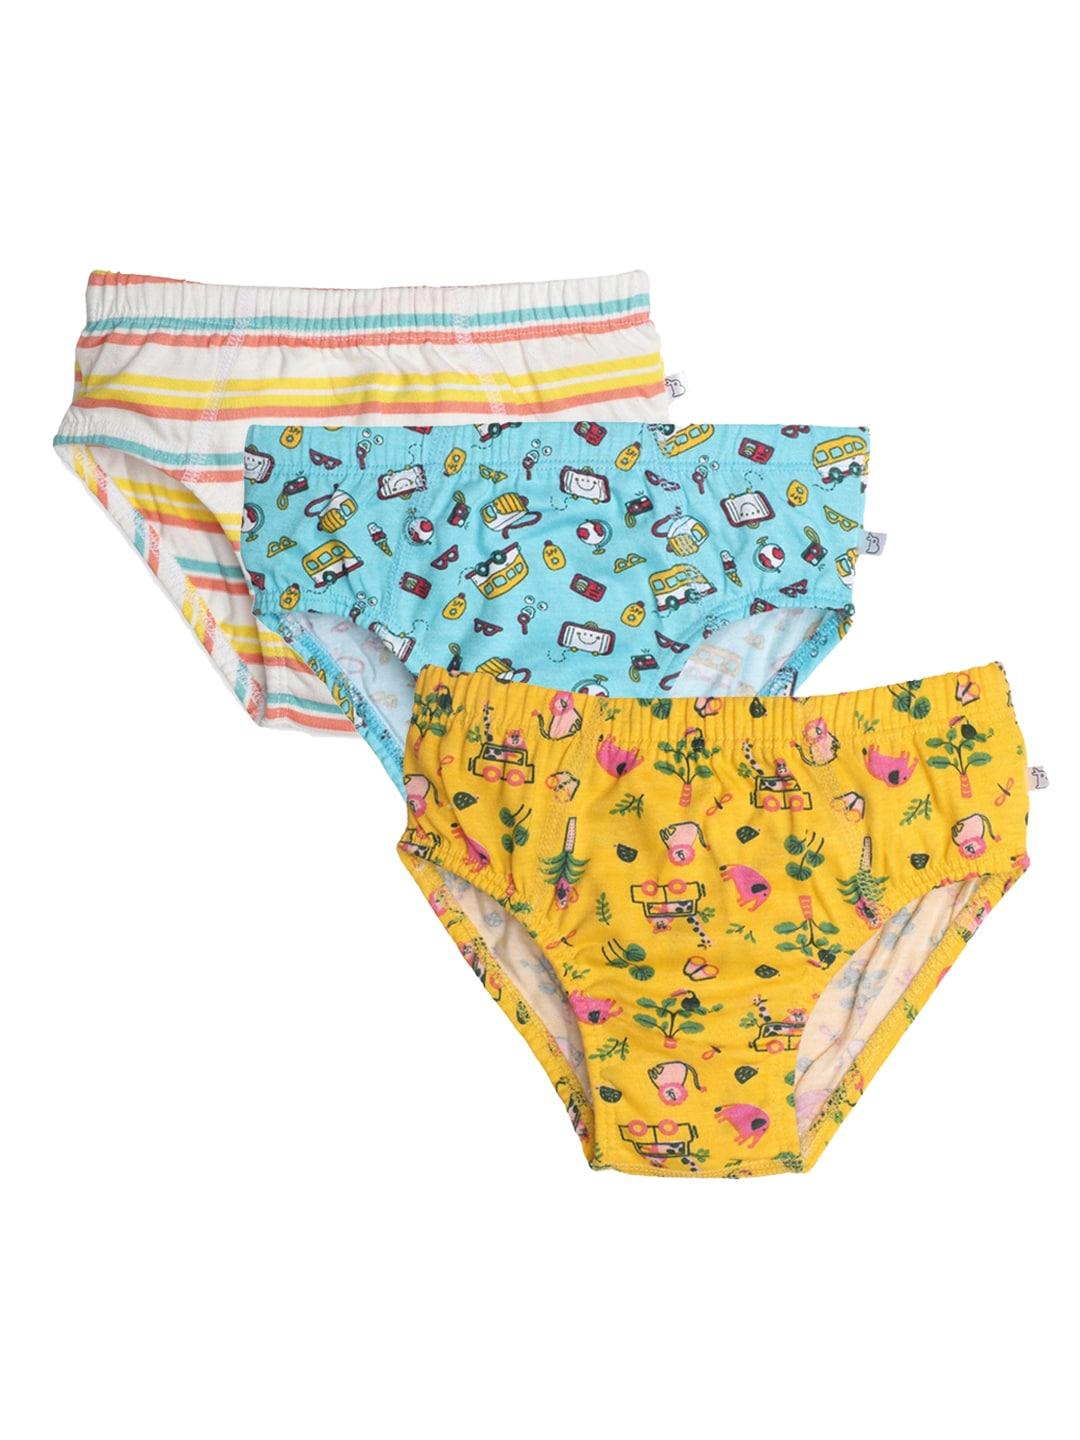 SuperBottoms Pack of 3 Yellow & Blue Printed Briefs